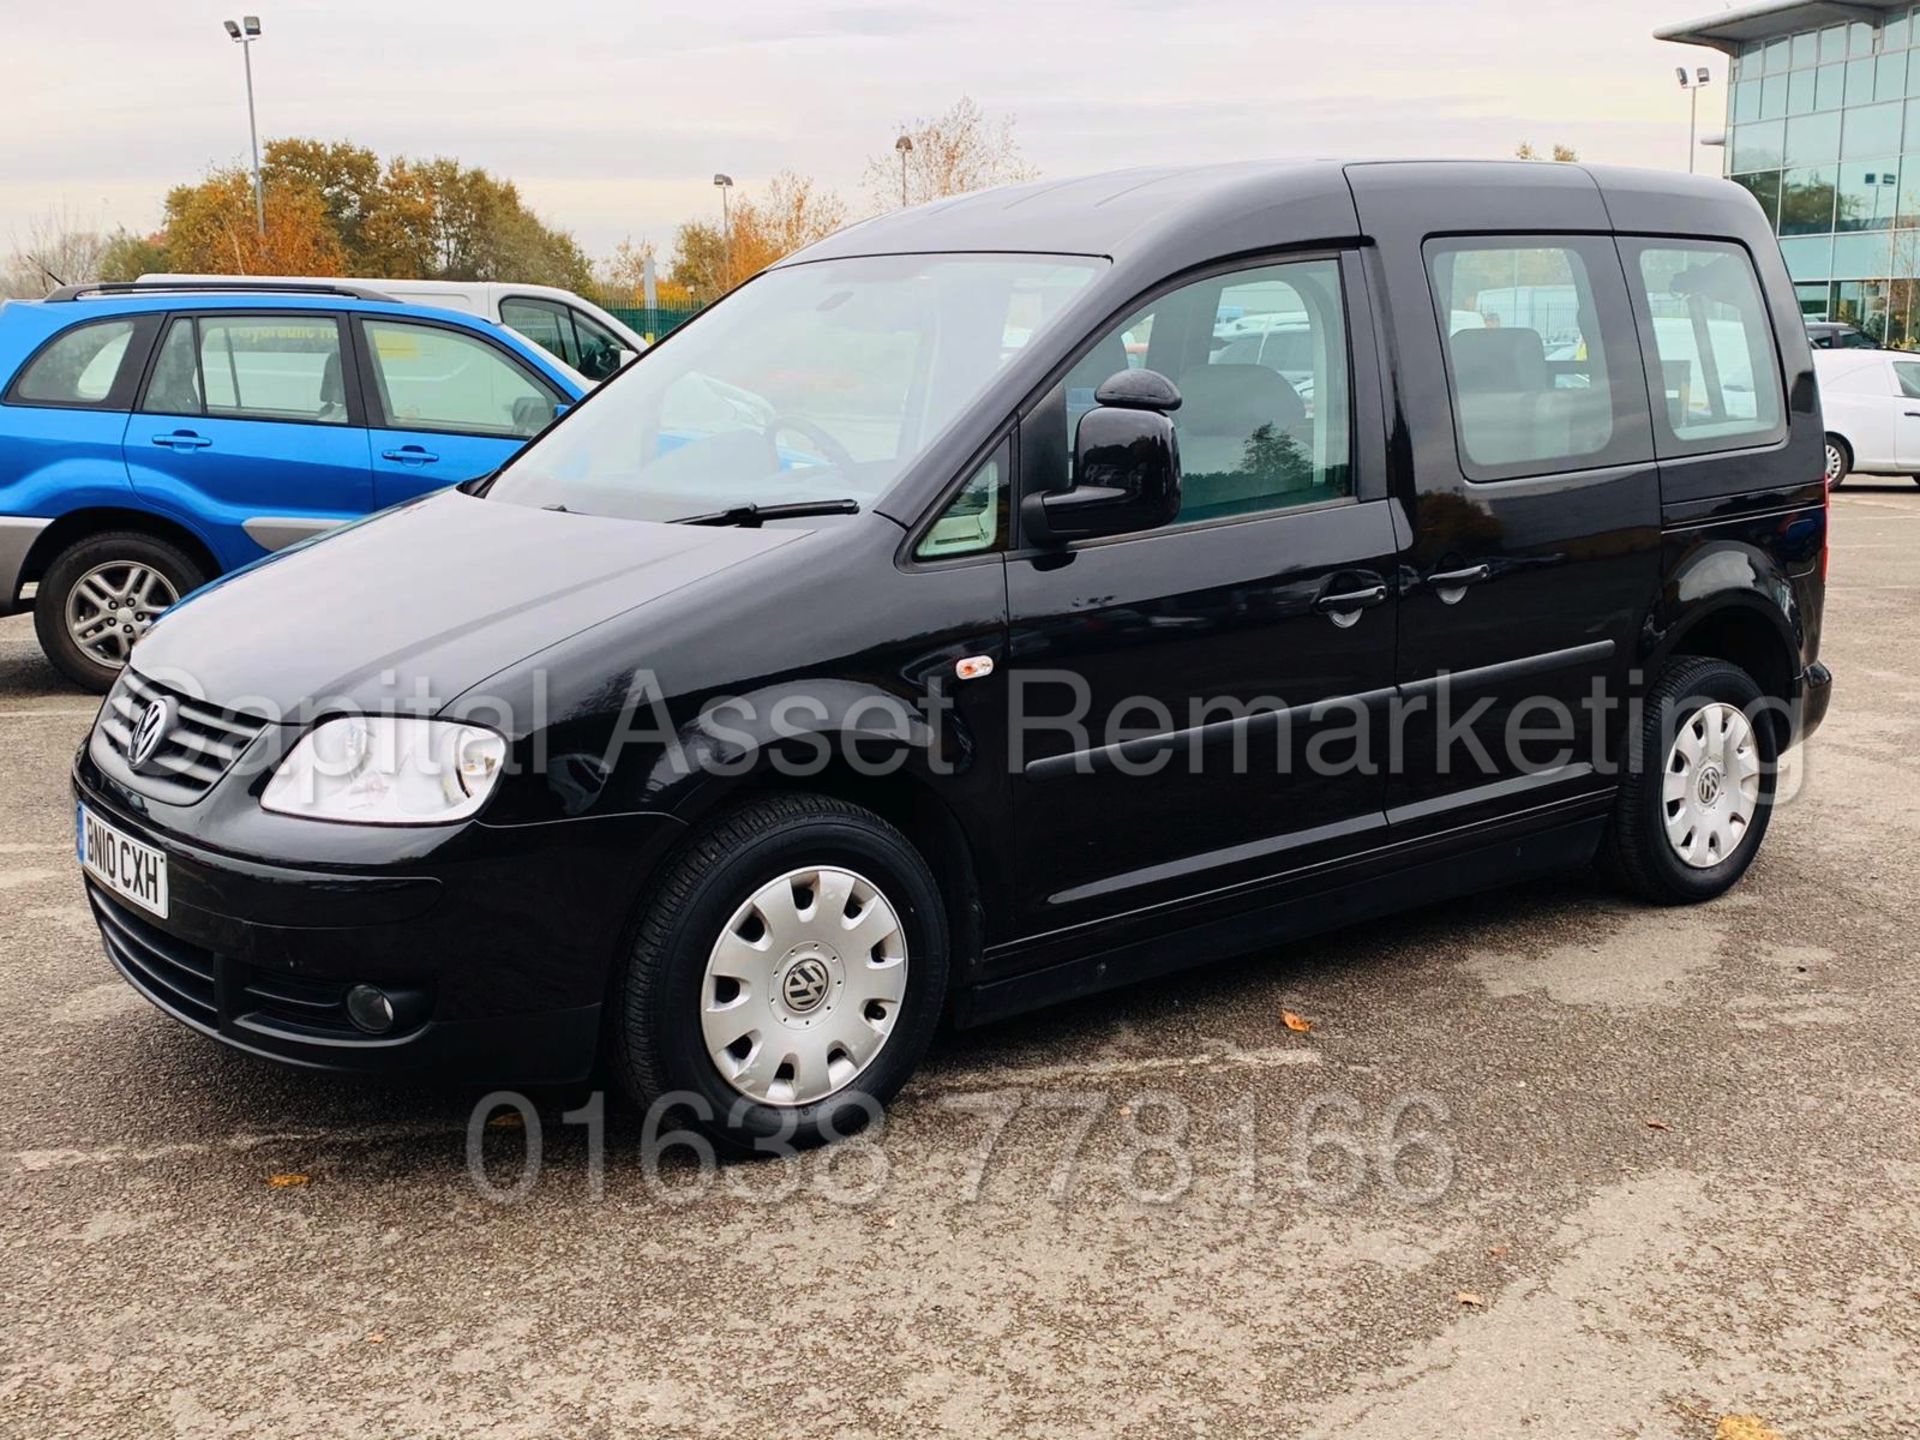 VOLKSWAGEN CADDY C20 *LIFE EDITION* DISABILITY ACCESS / WAV (2010) '1.9 TDI -AUTO' *A/C* (LOW MILES) - Image 5 of 32